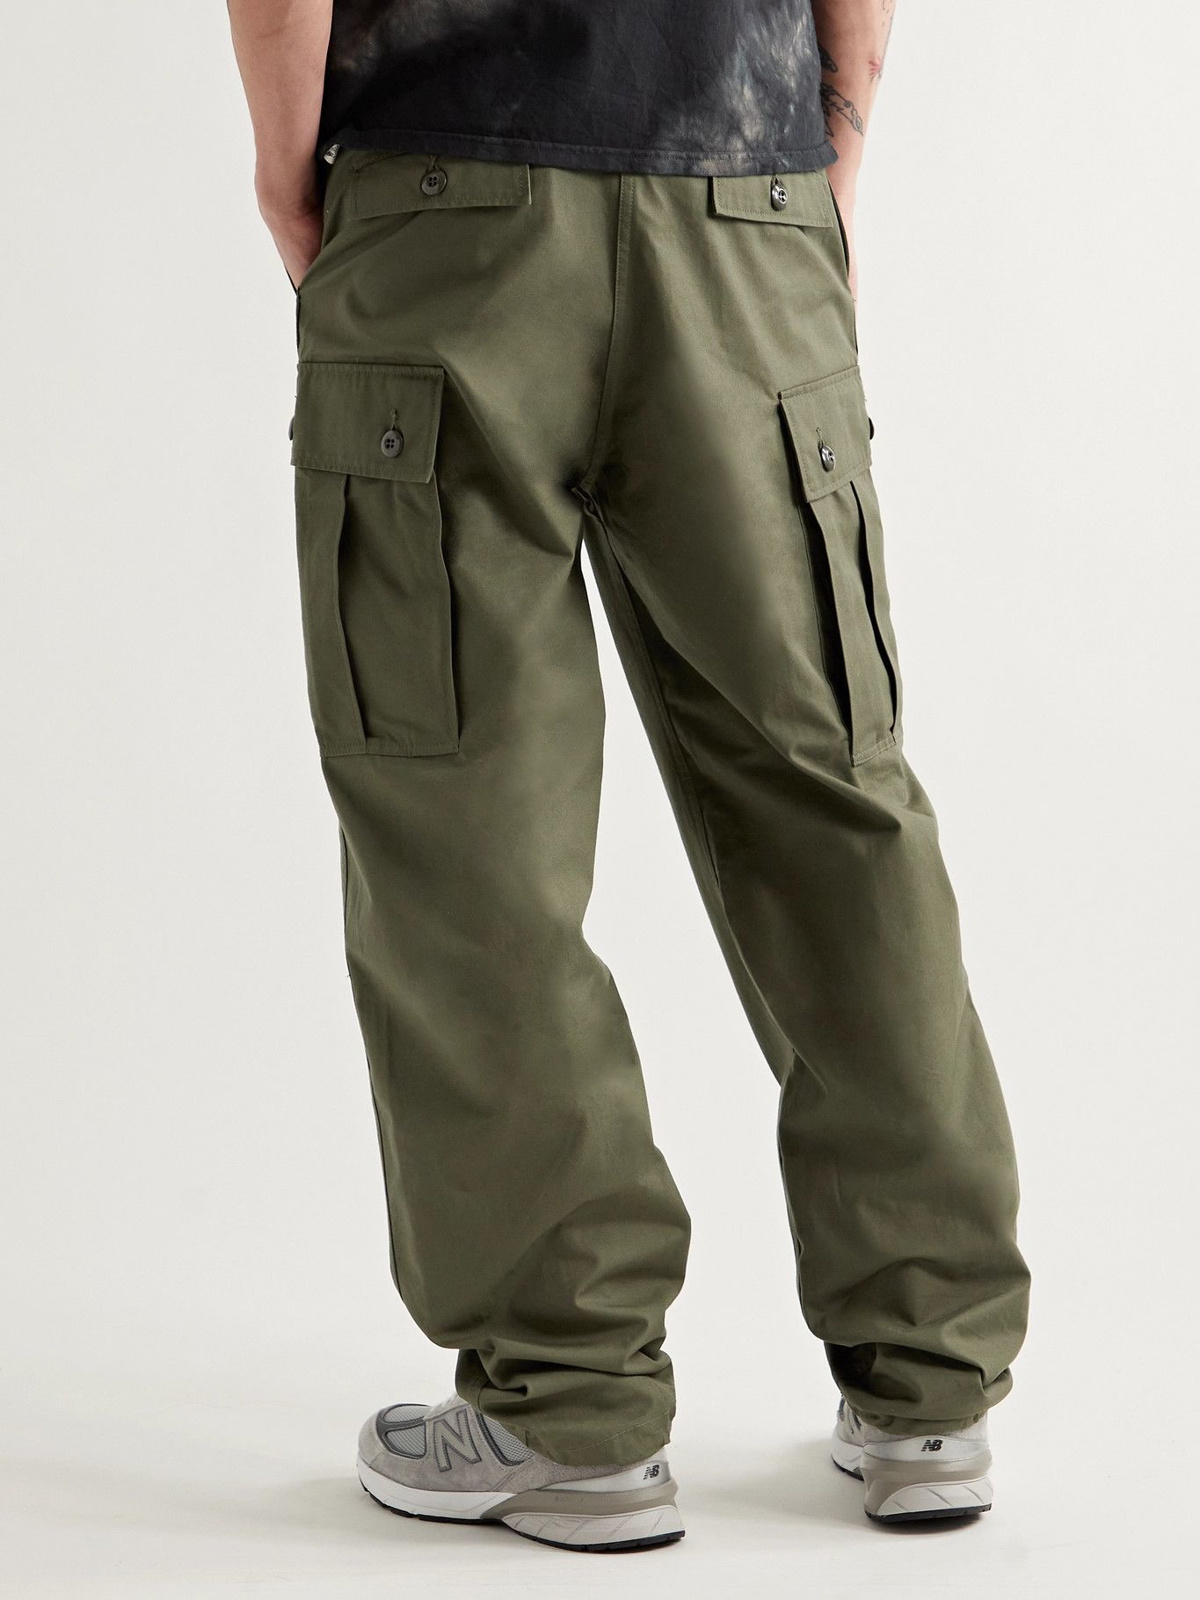 THE REAL MCCOY'S - Cotton-Poplin Cargo Trousers - Green The Real